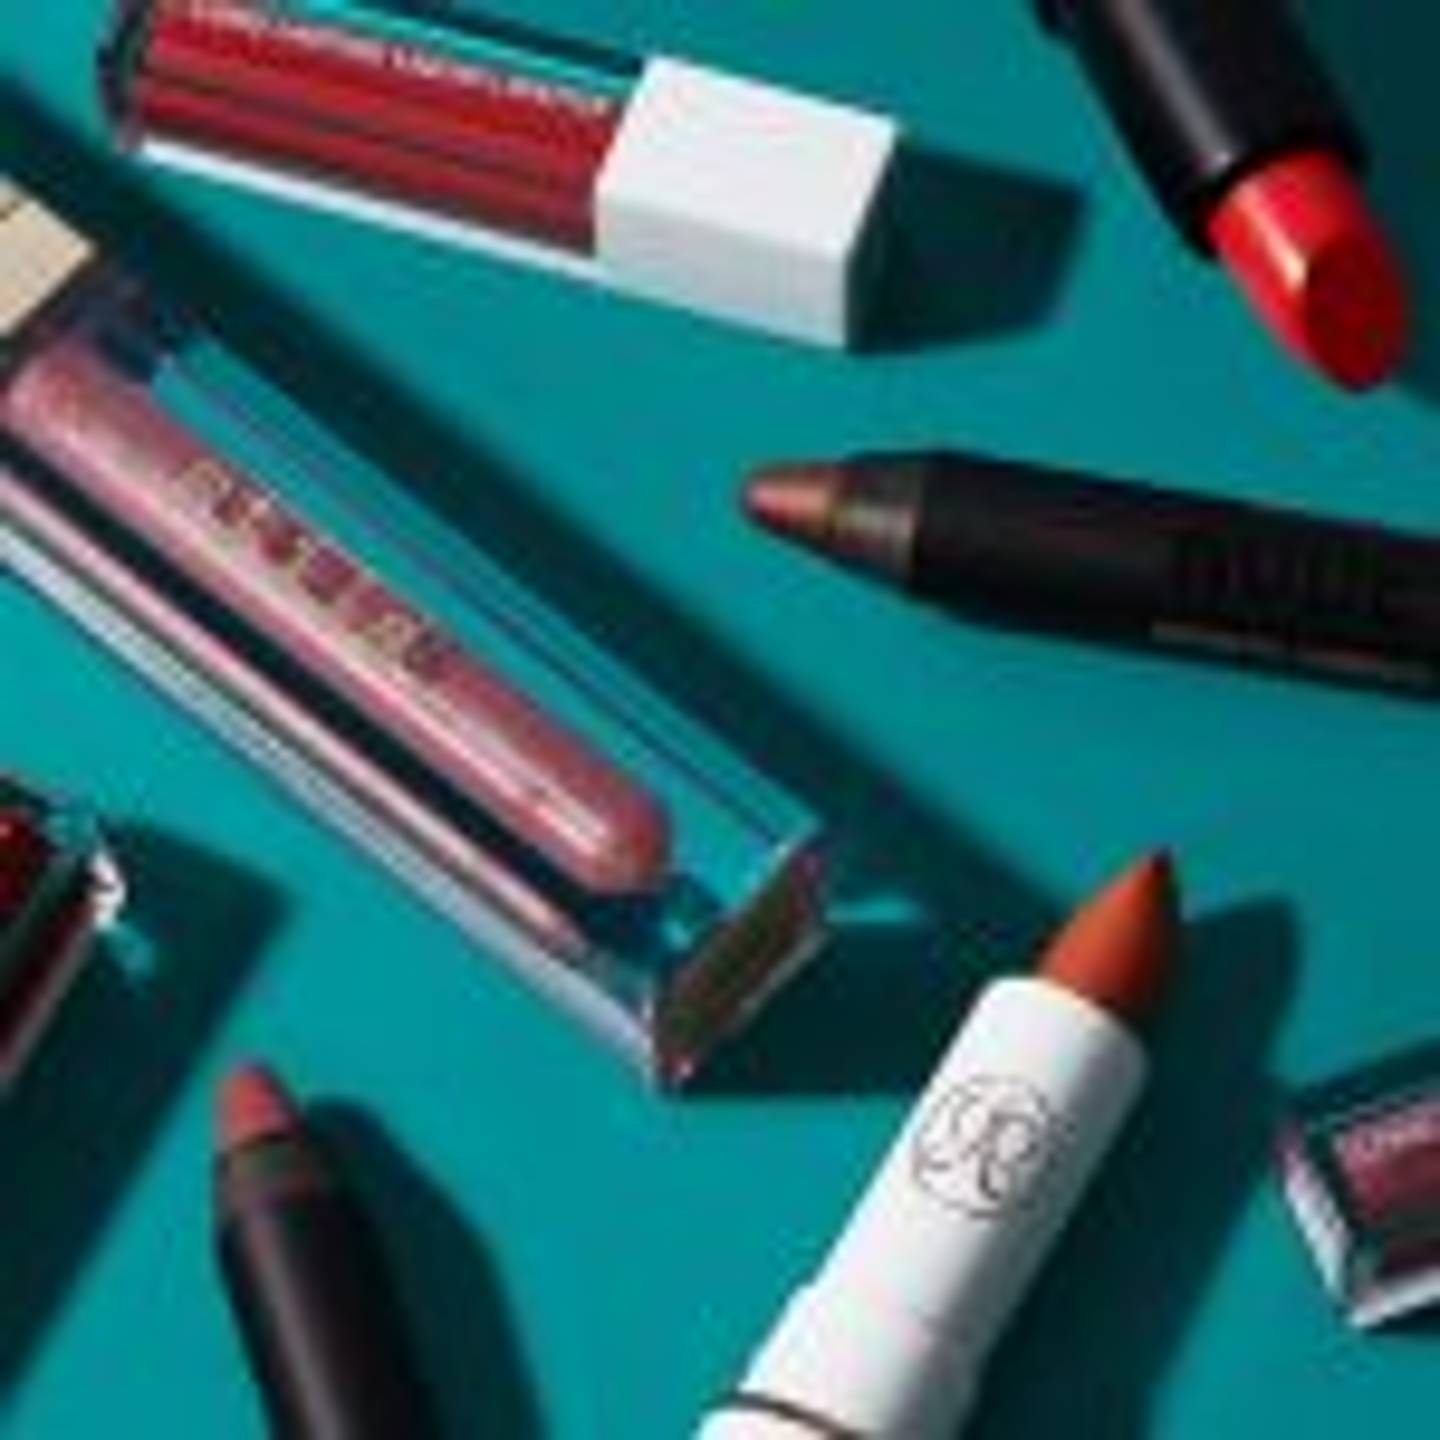 Lips And lipstick for women for at best prices